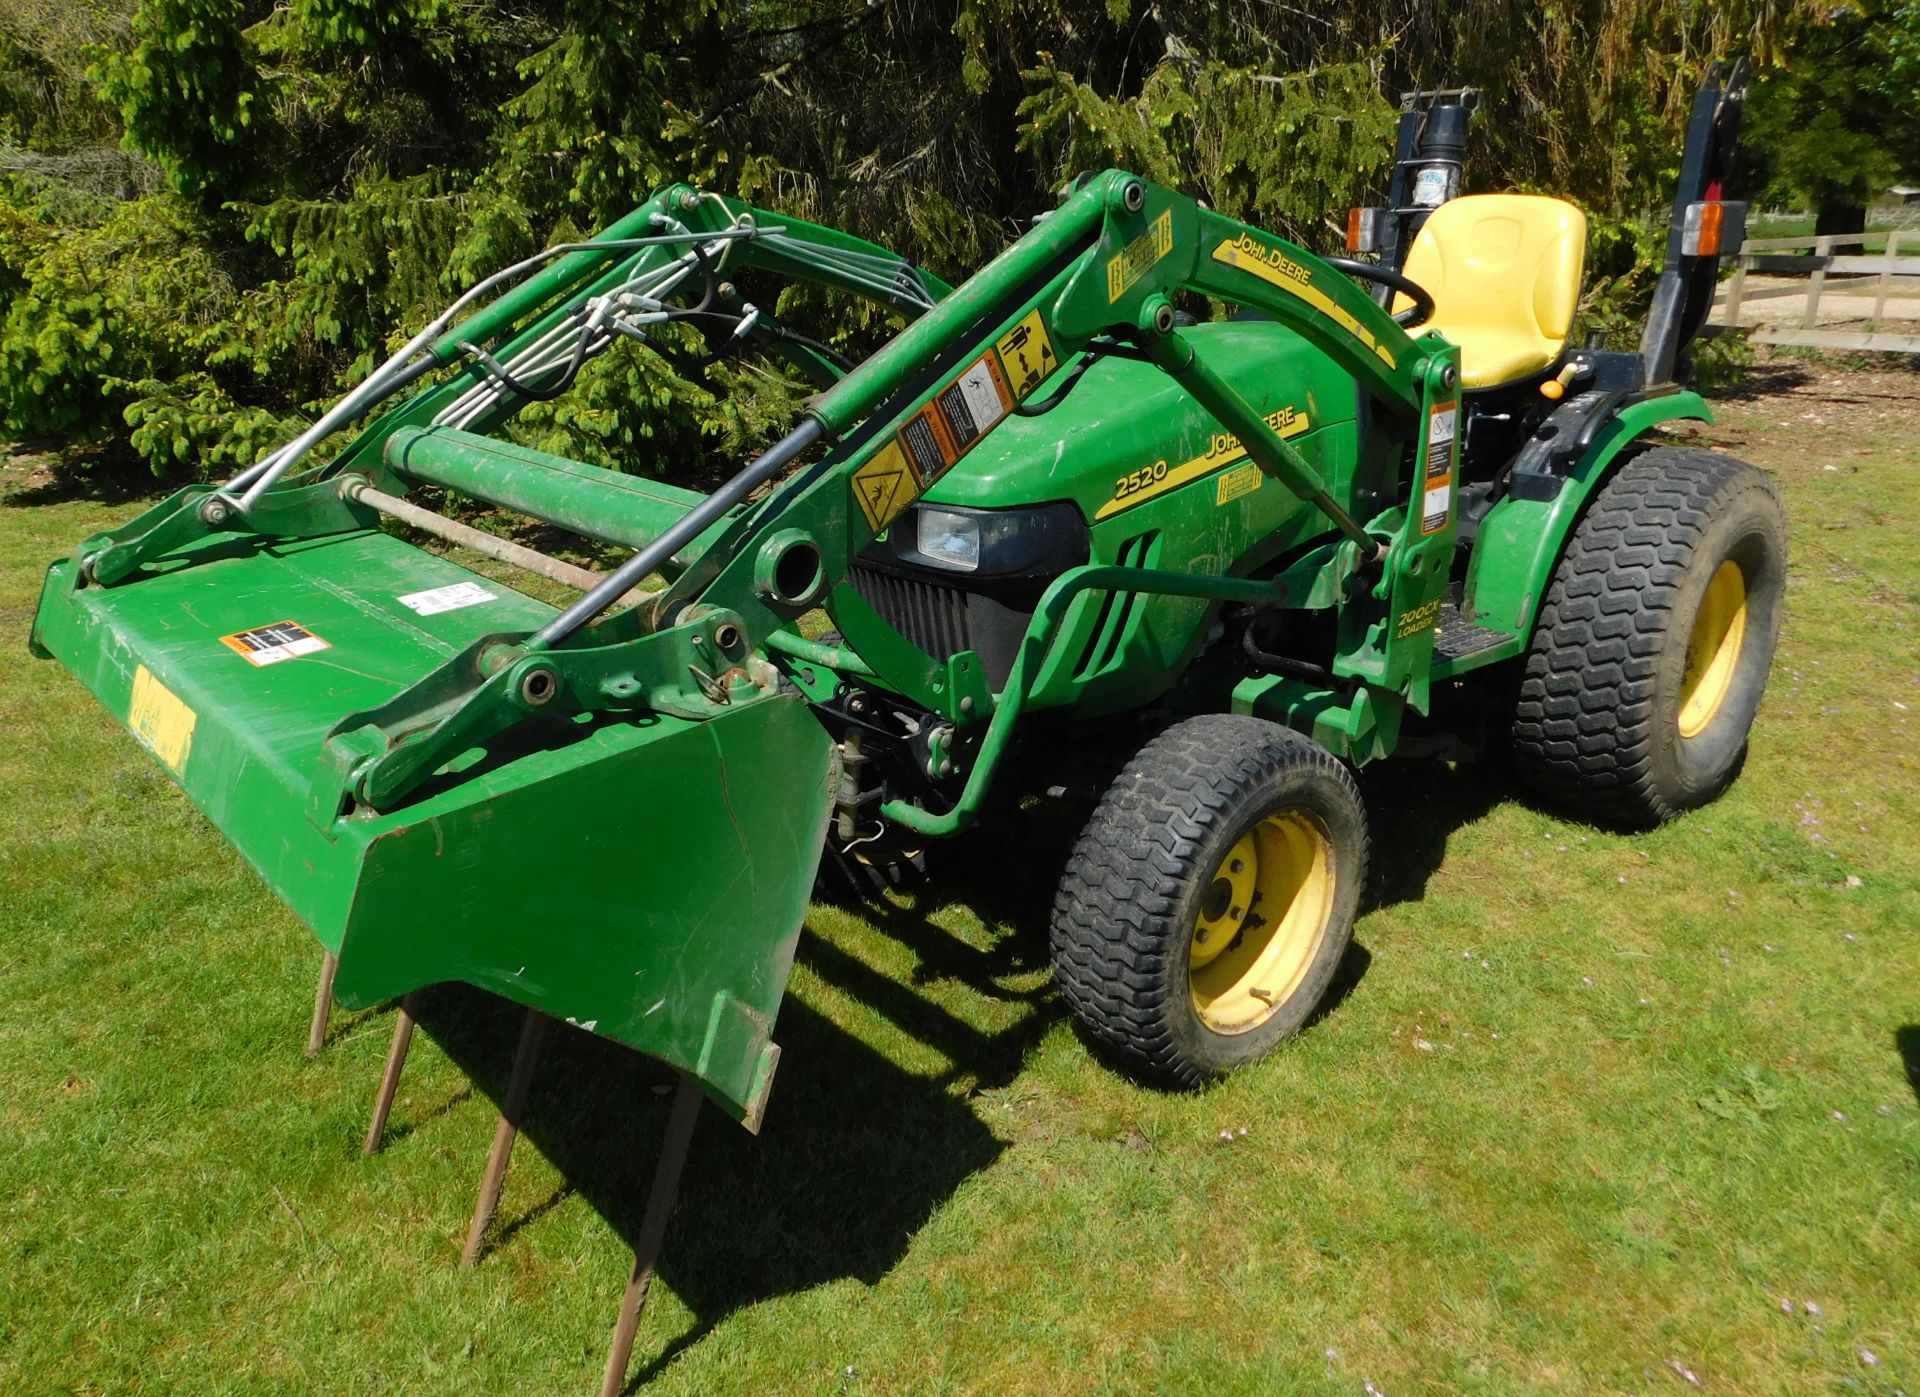 John Deere 2520 Compact Tractor, AU60 DDV, First Registered 6th January 2011, 770 Hours with Spare - Image 2 of 10